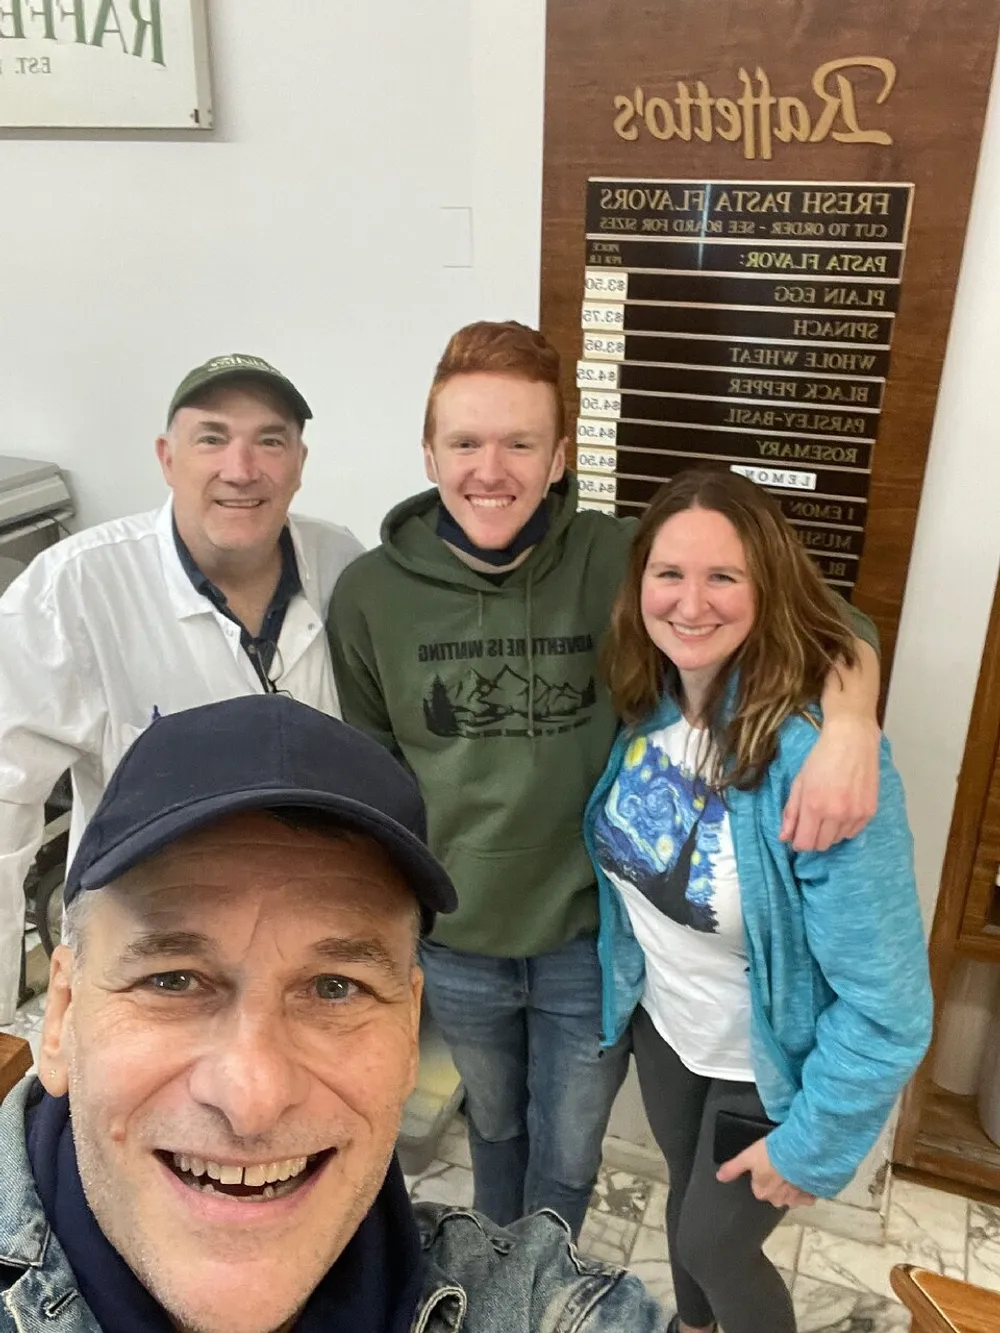 Four people are smiling for a selfie in a room with a wooden board displaying various options in reversed text suggesting theyre at a food service establishment